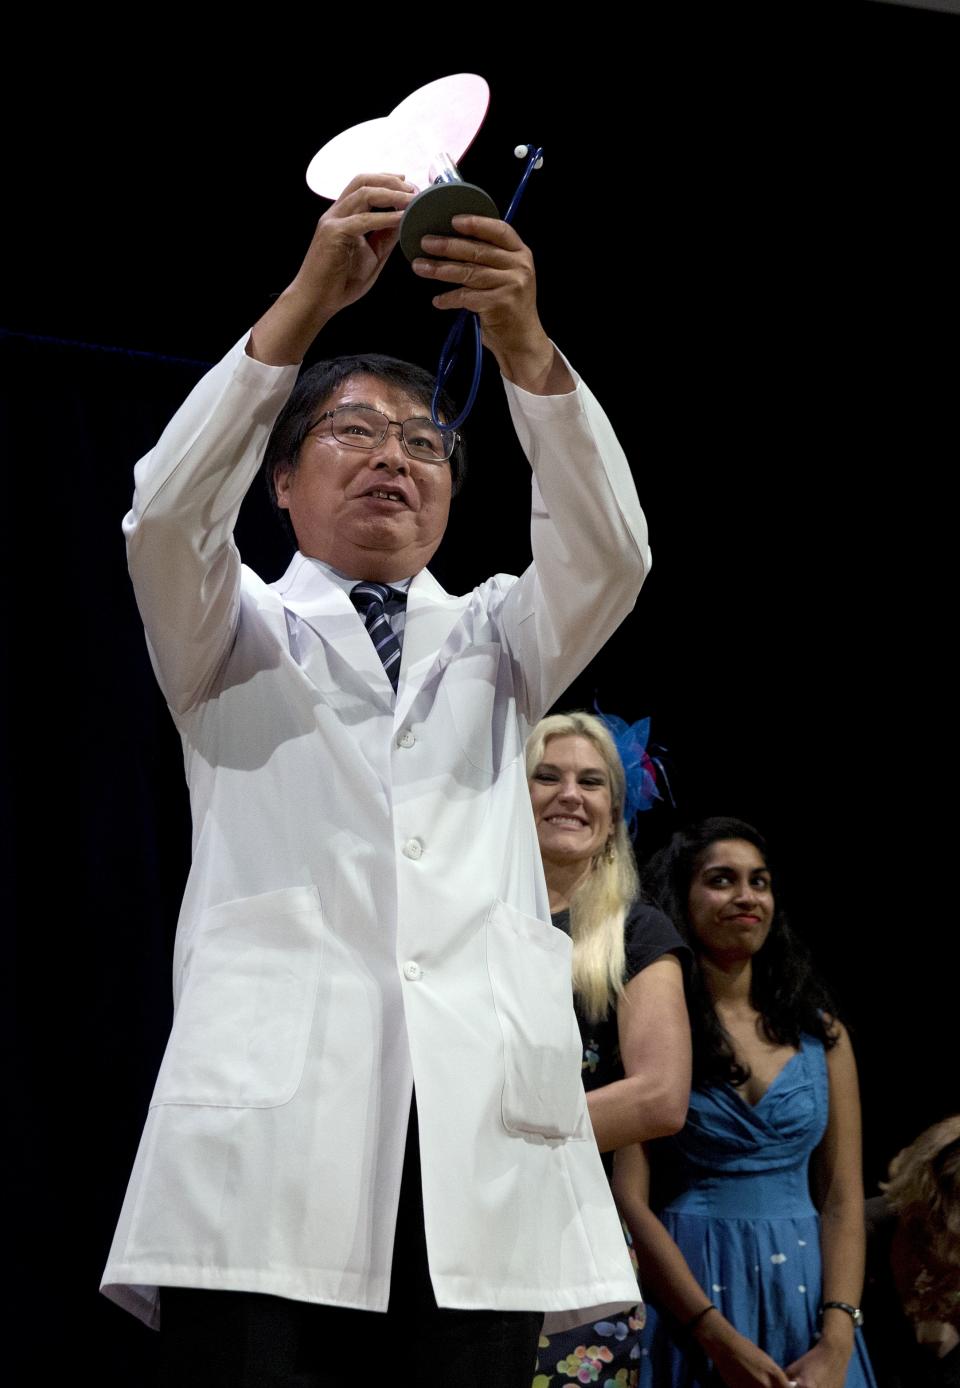 Akira Horiuchi, of Japan, holds up his Ig Nobel for medical education during award ceremonies at Harvard University in Cambridge, Mass., Thursday, Sept. 13, 2018. Horiuchi won for devising a revolutionary new way to give yourself a colonoscopy. (AP Photo/Michael Dwyer)